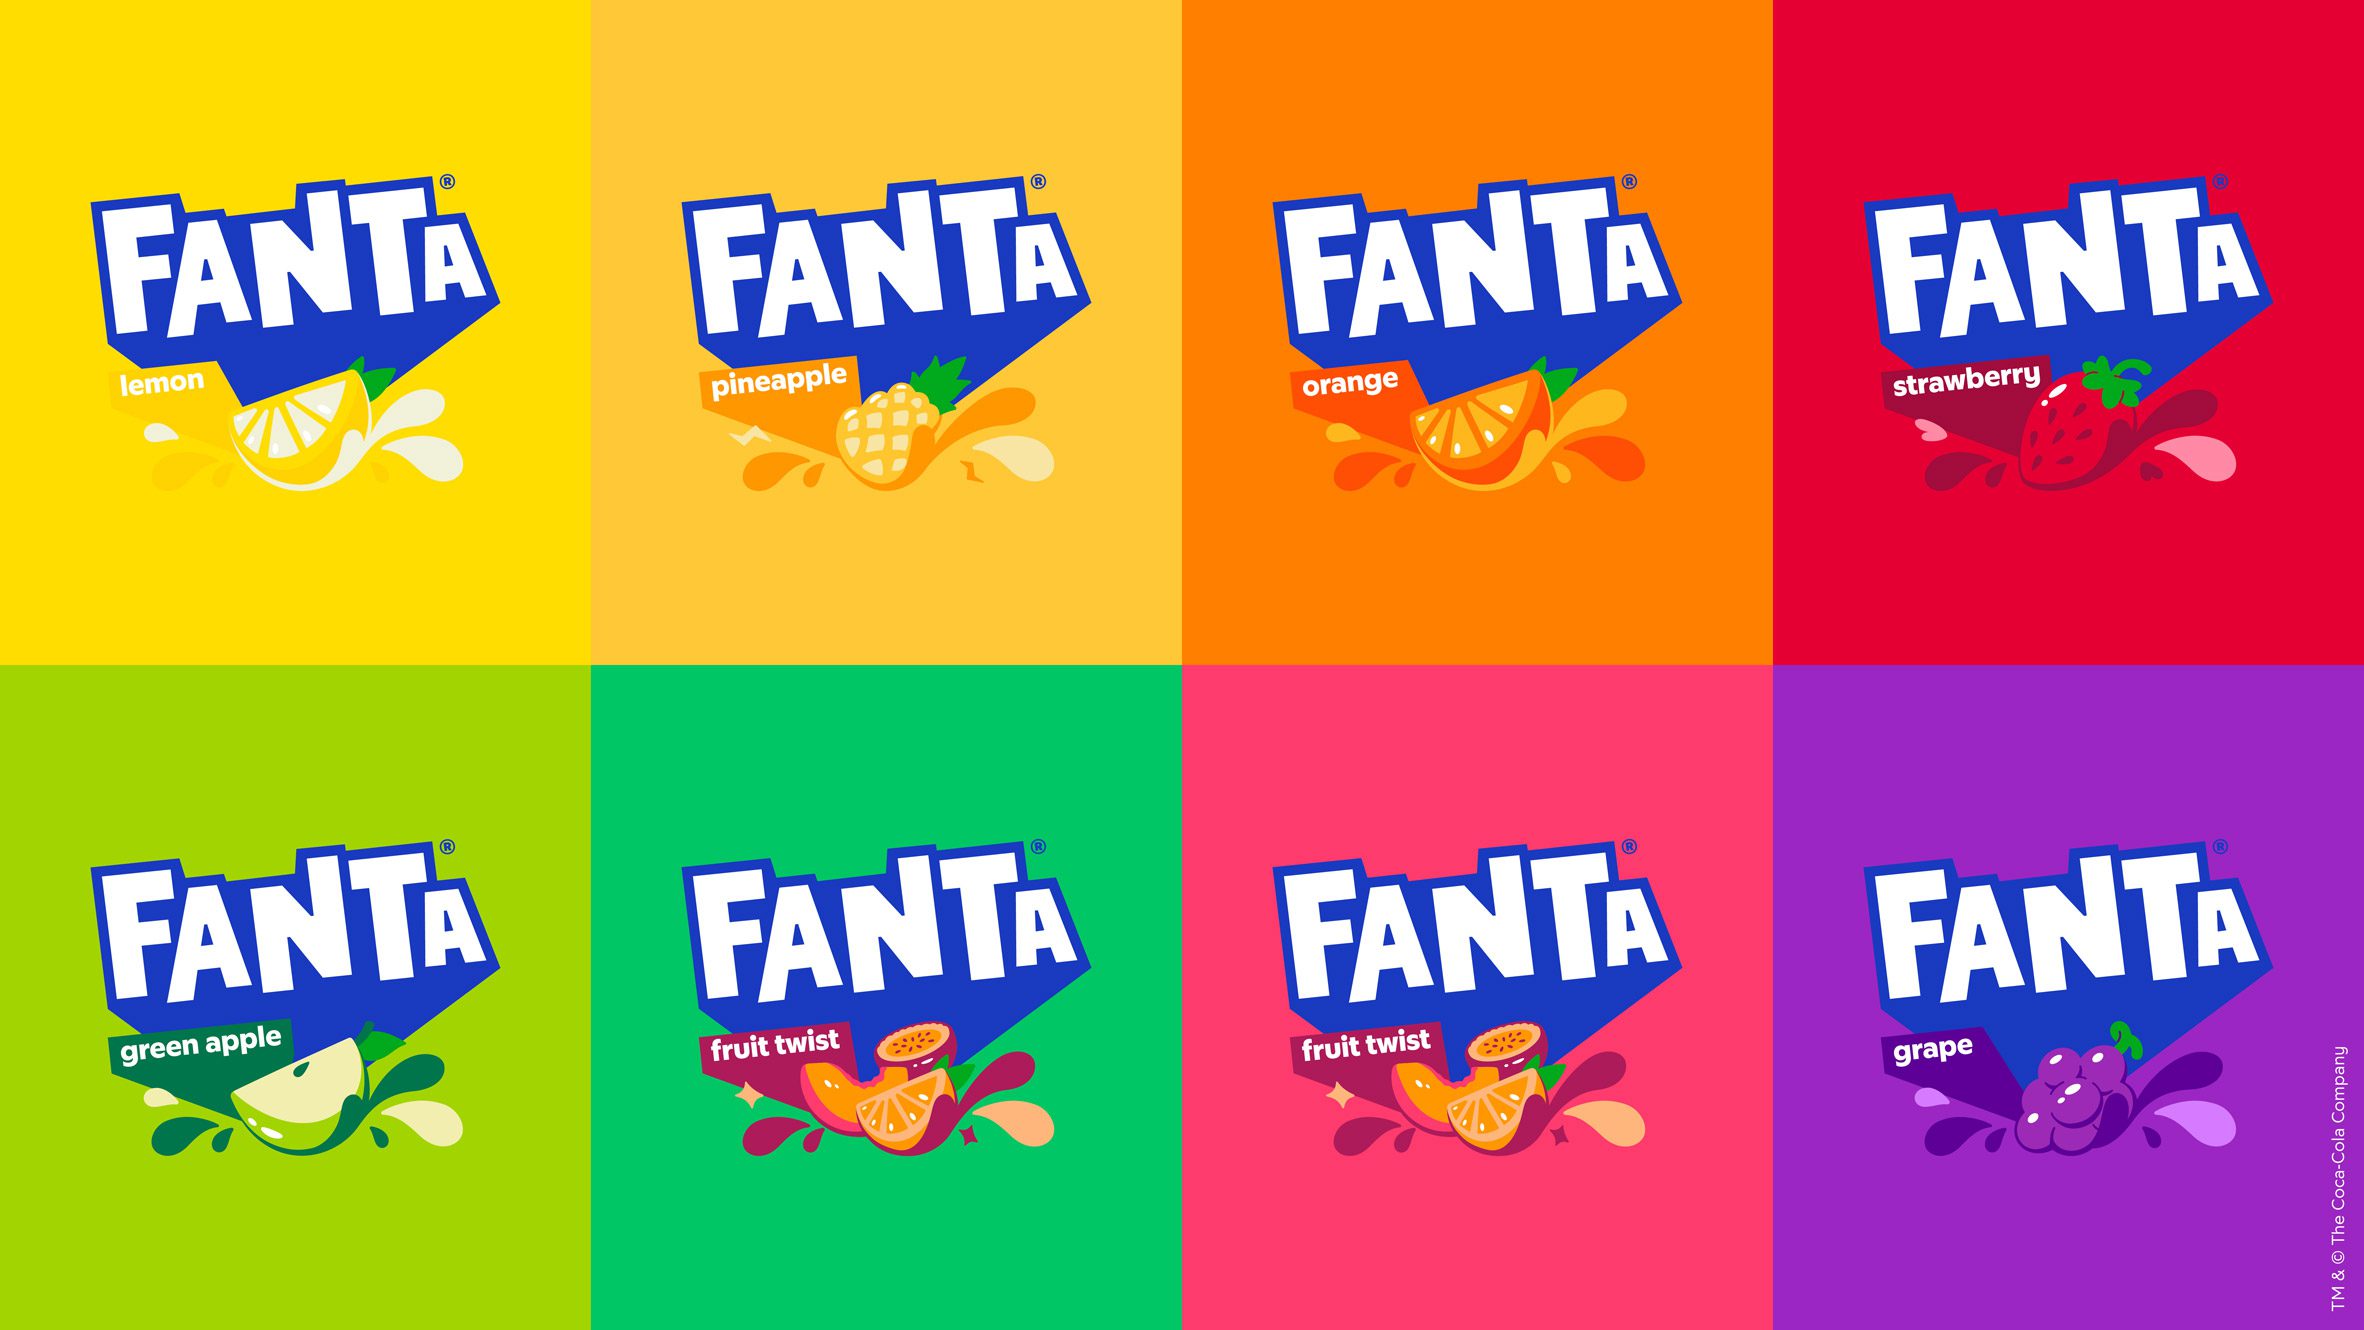 Fanta rebrand with all flavours